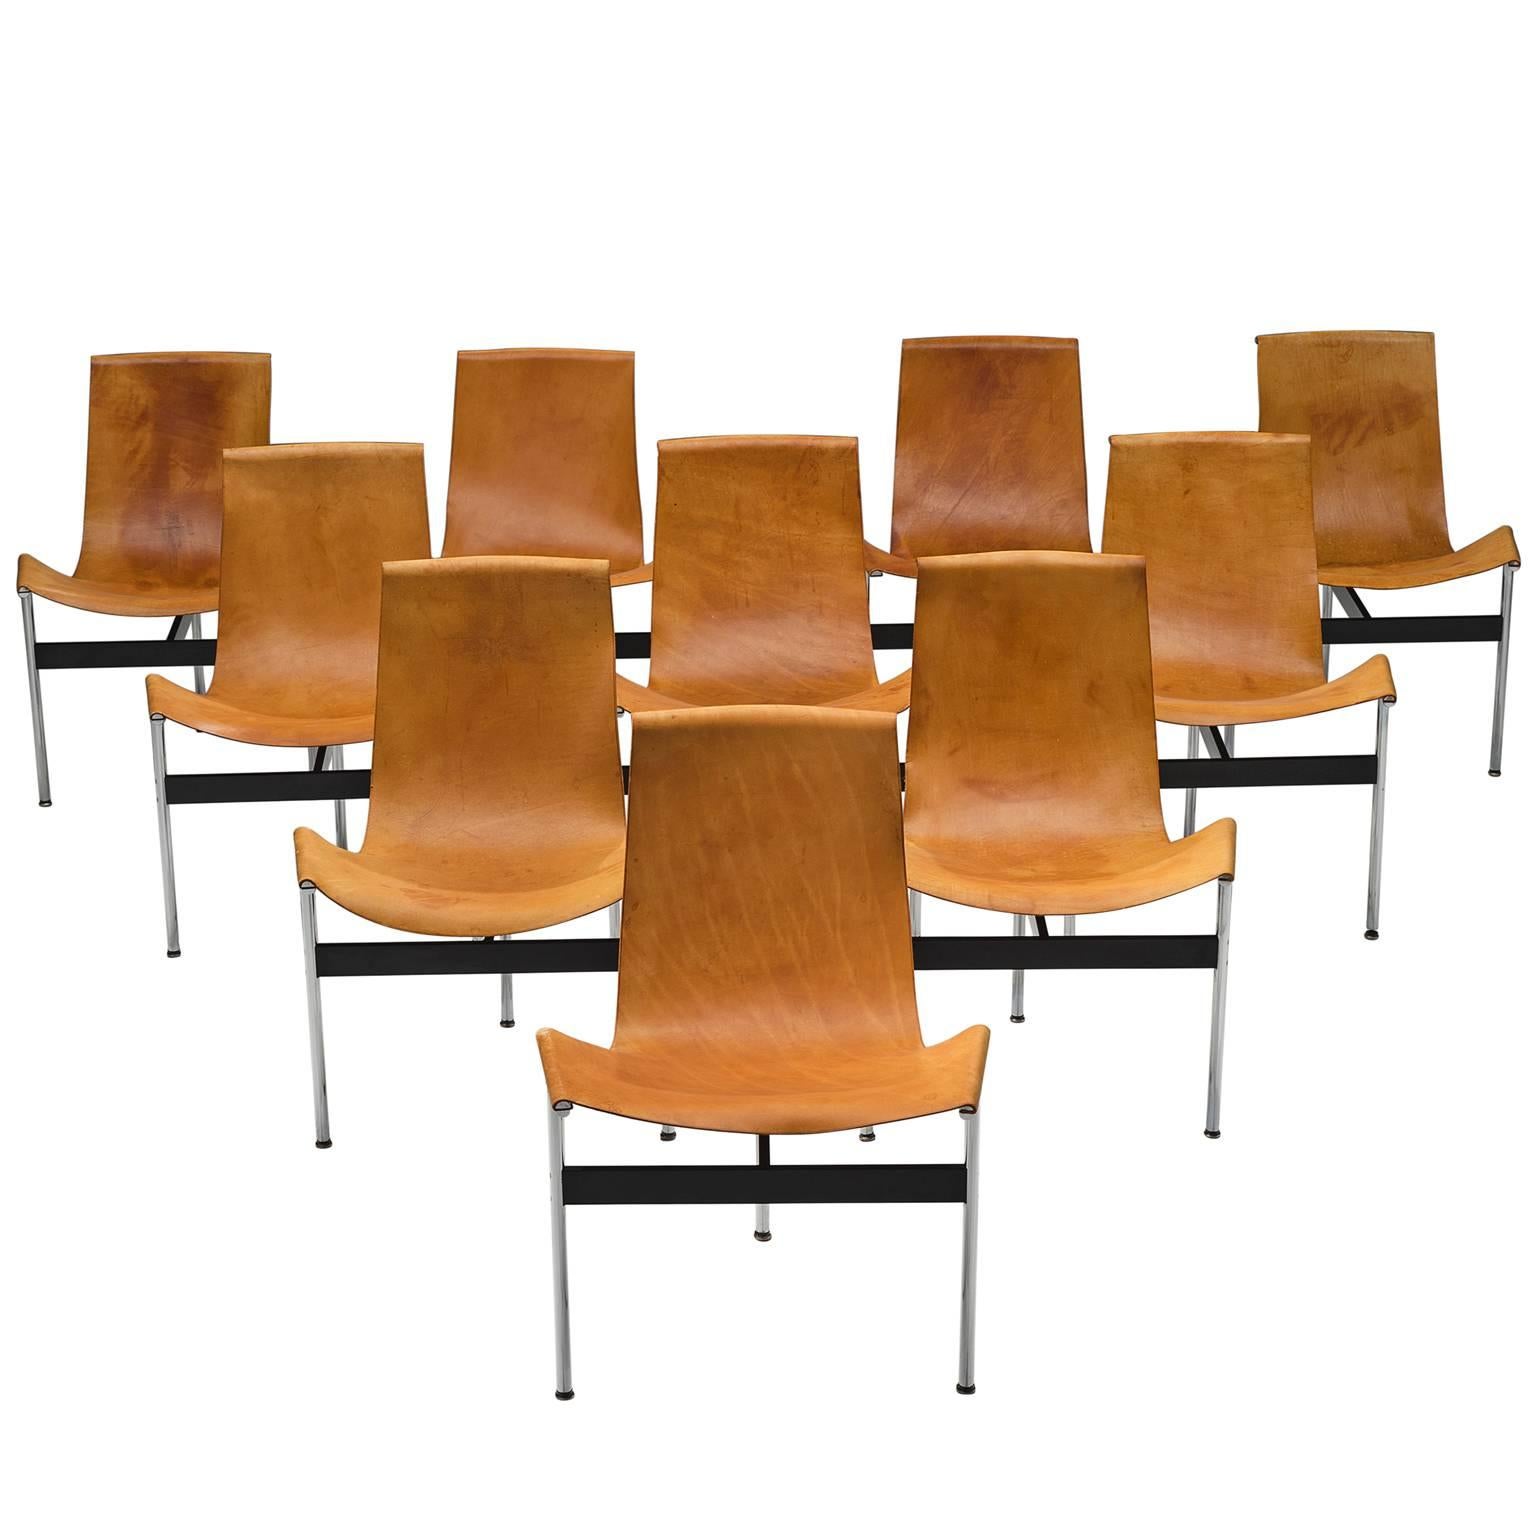 Katavolos, Kelley and Littell T-Chairs in Cognac Leather, Set of Ten